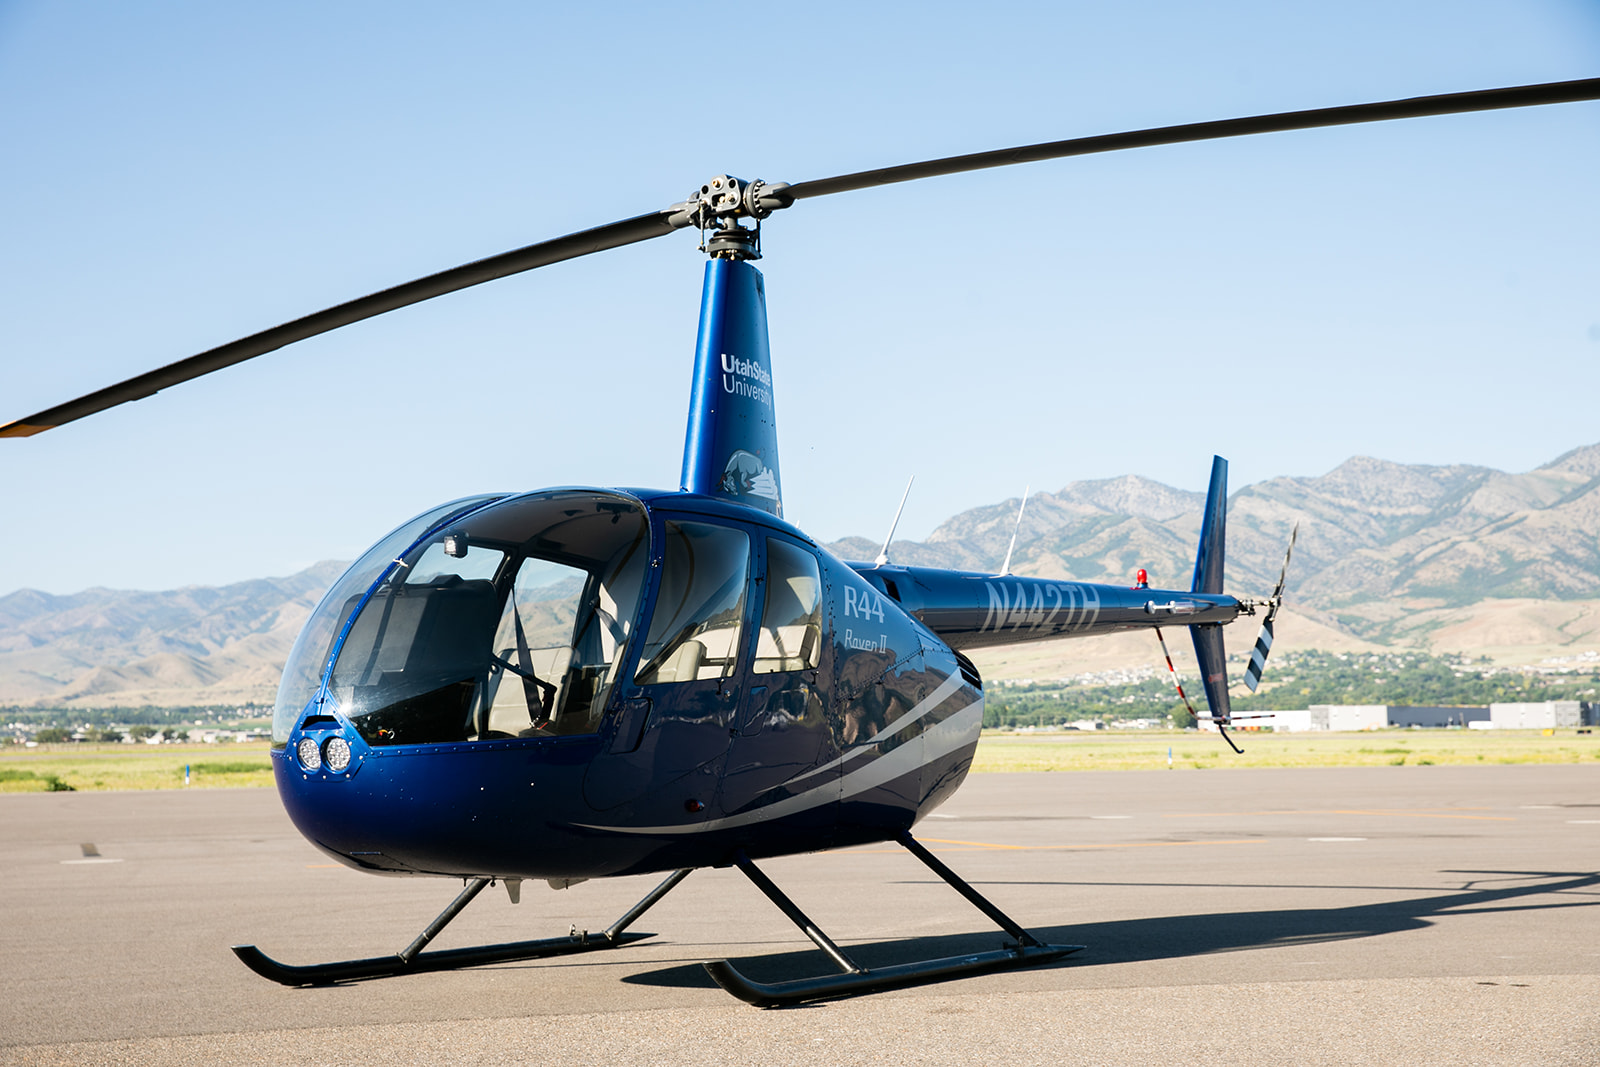 R44 Raven ll Helicopter